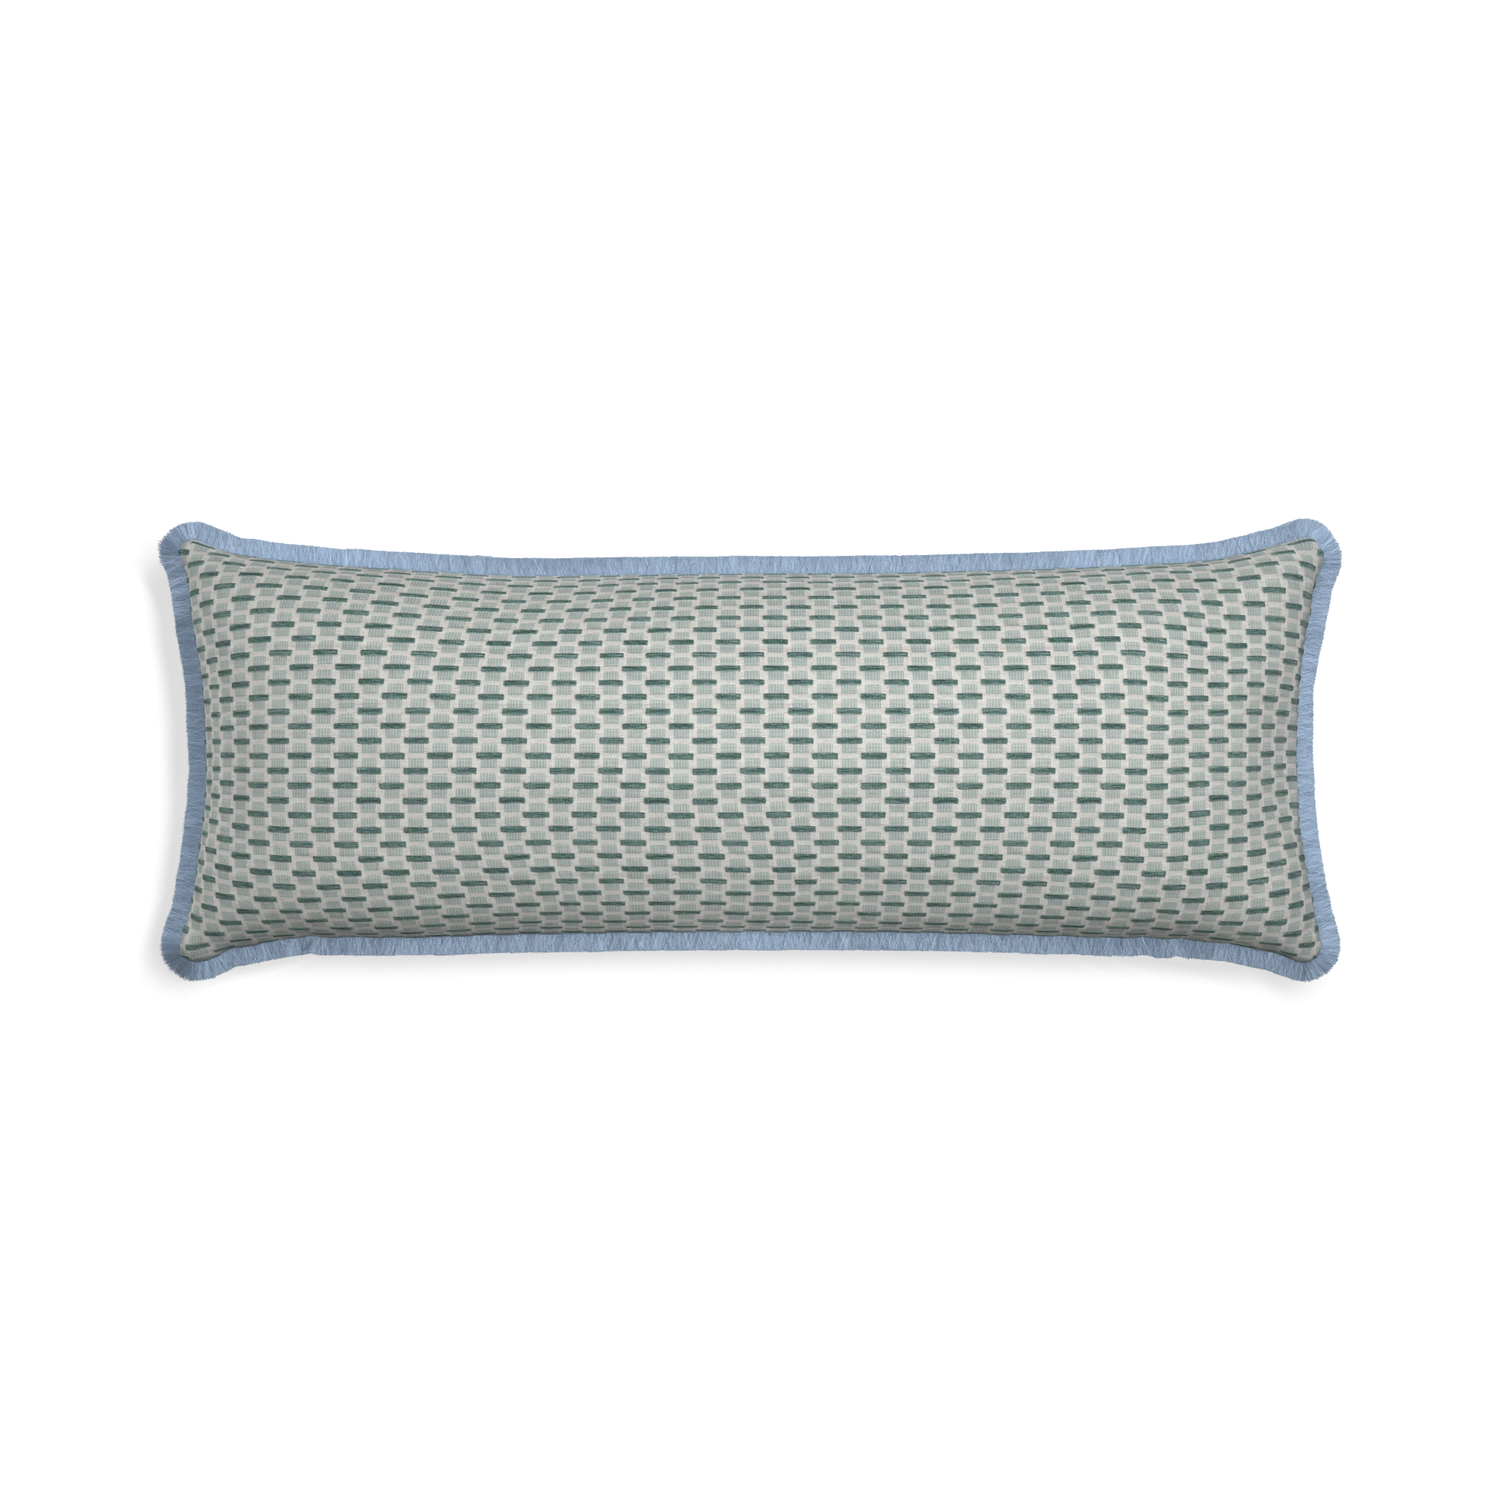 Xl-lumbar willow mint custom green geometric chenillepillow with sky fringe on white background